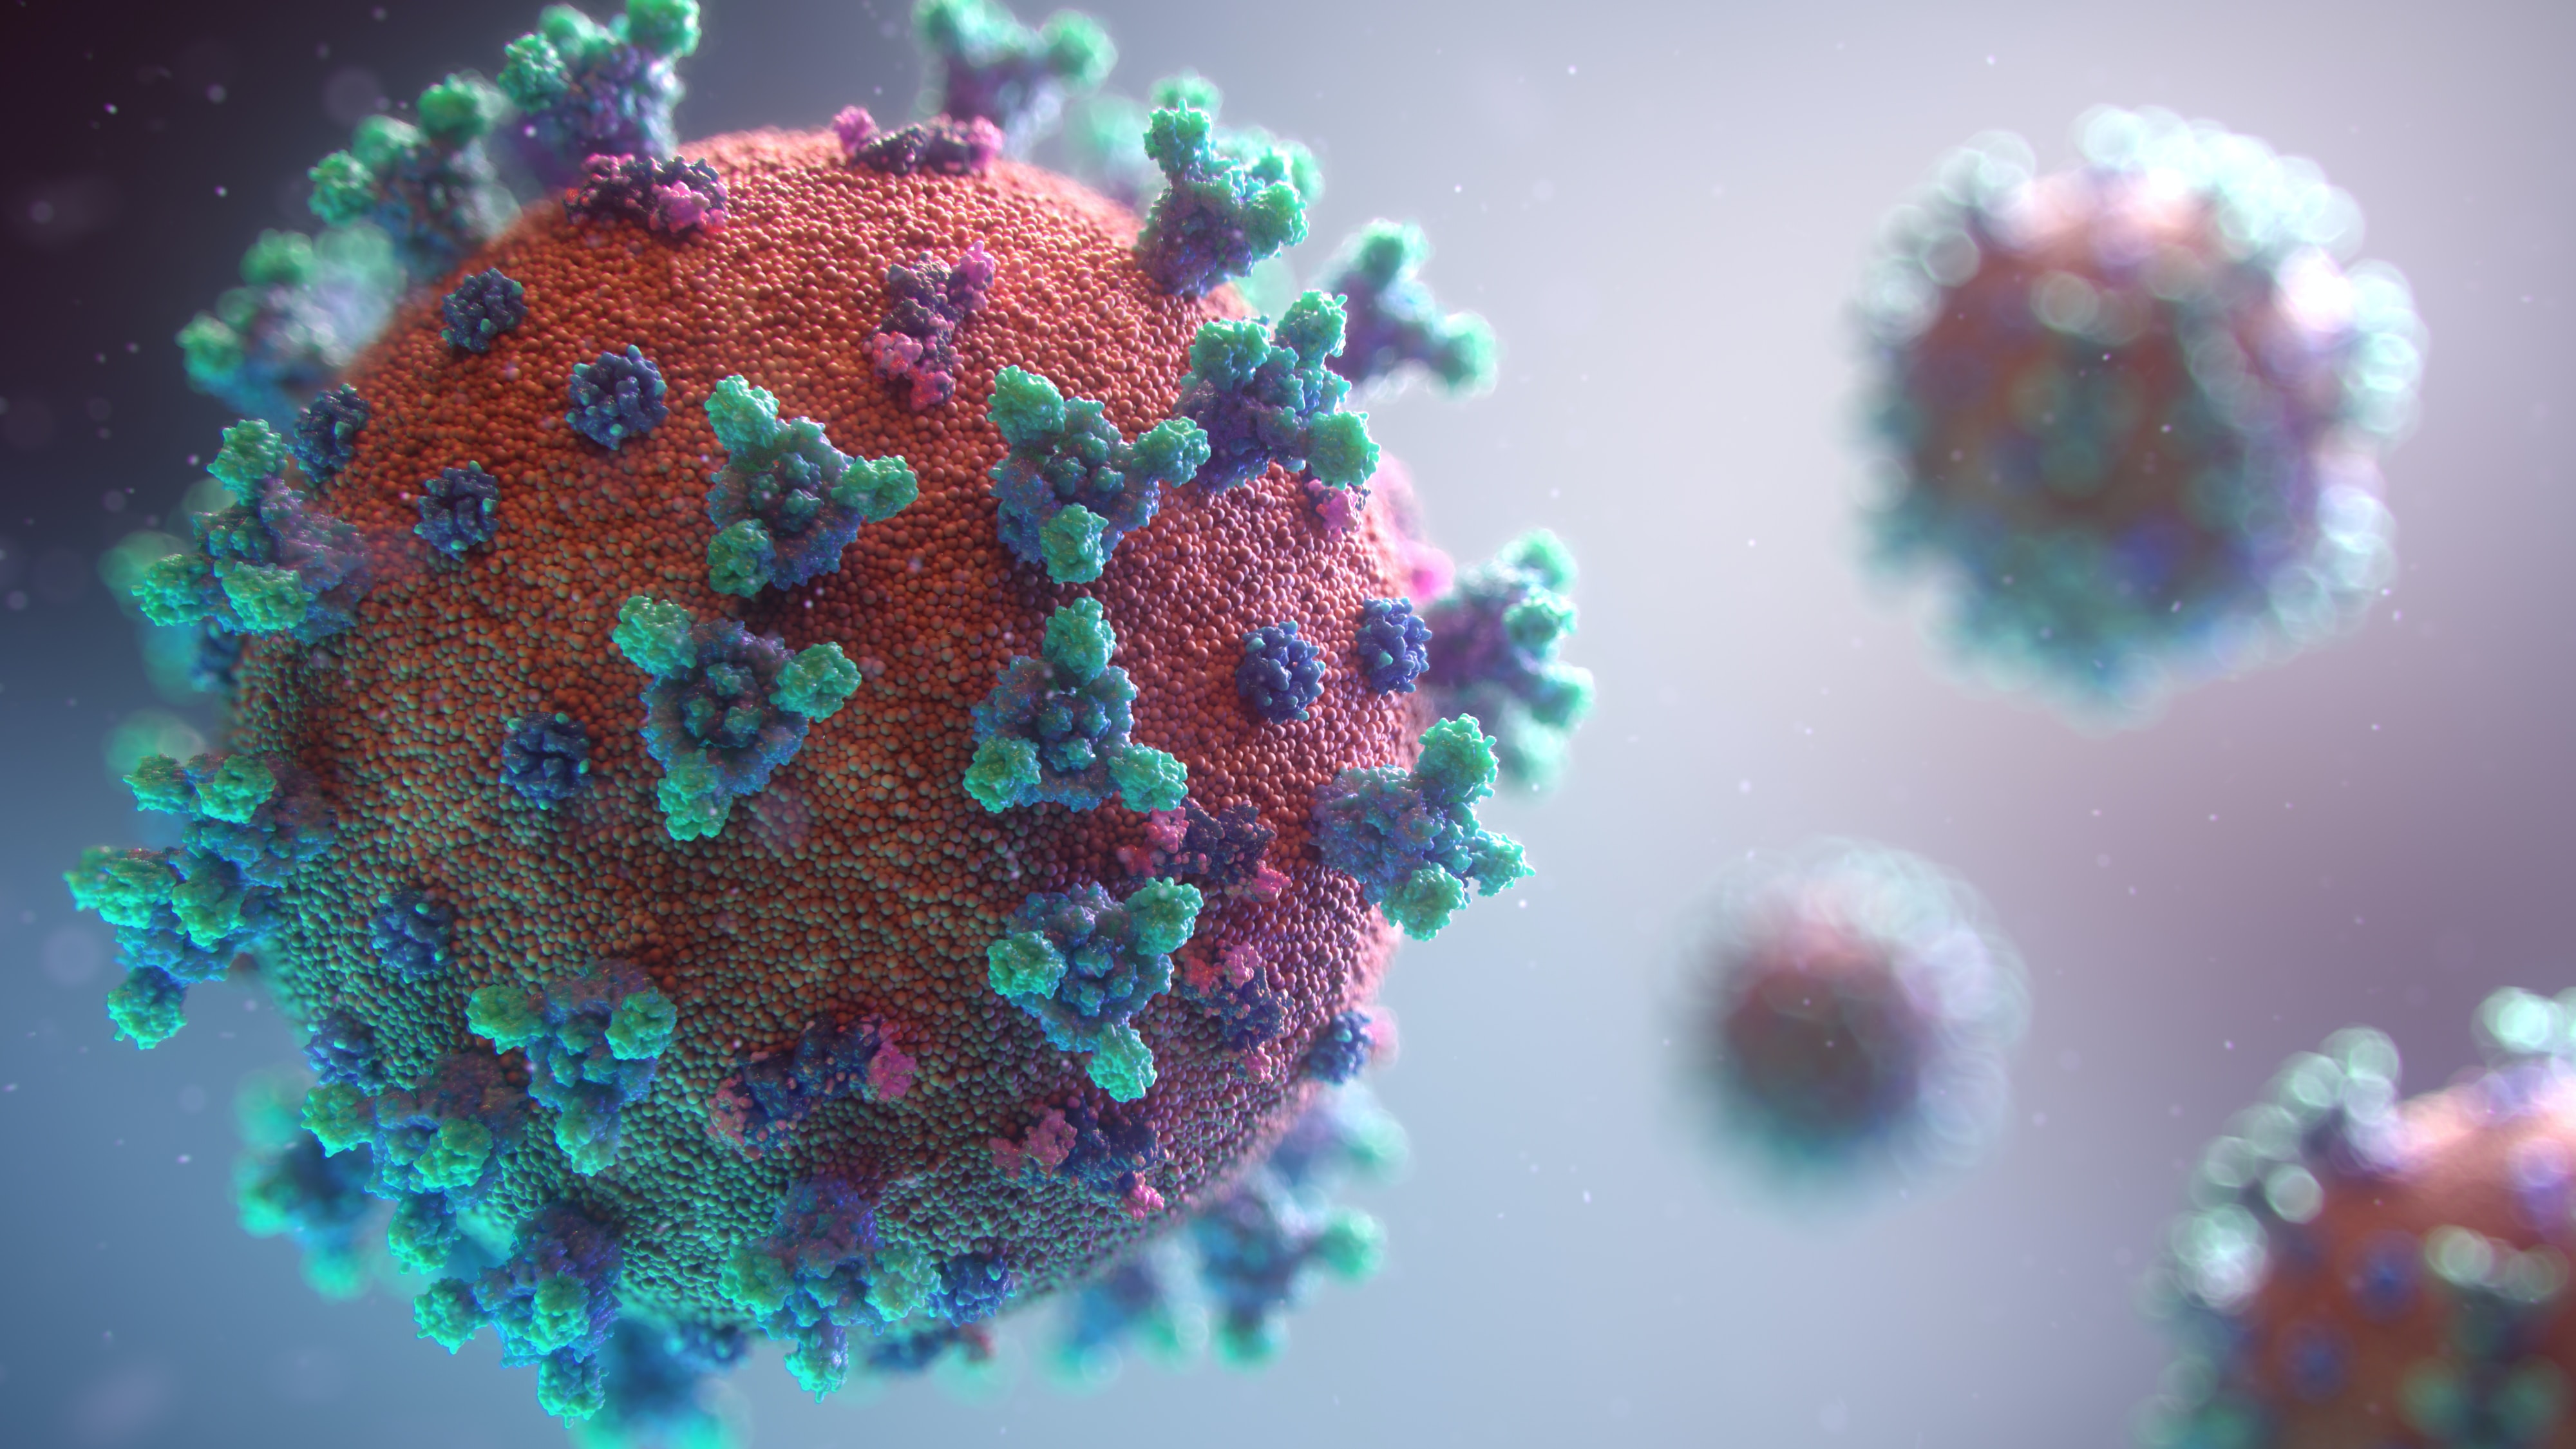 An artist impression of a coronavirus particle